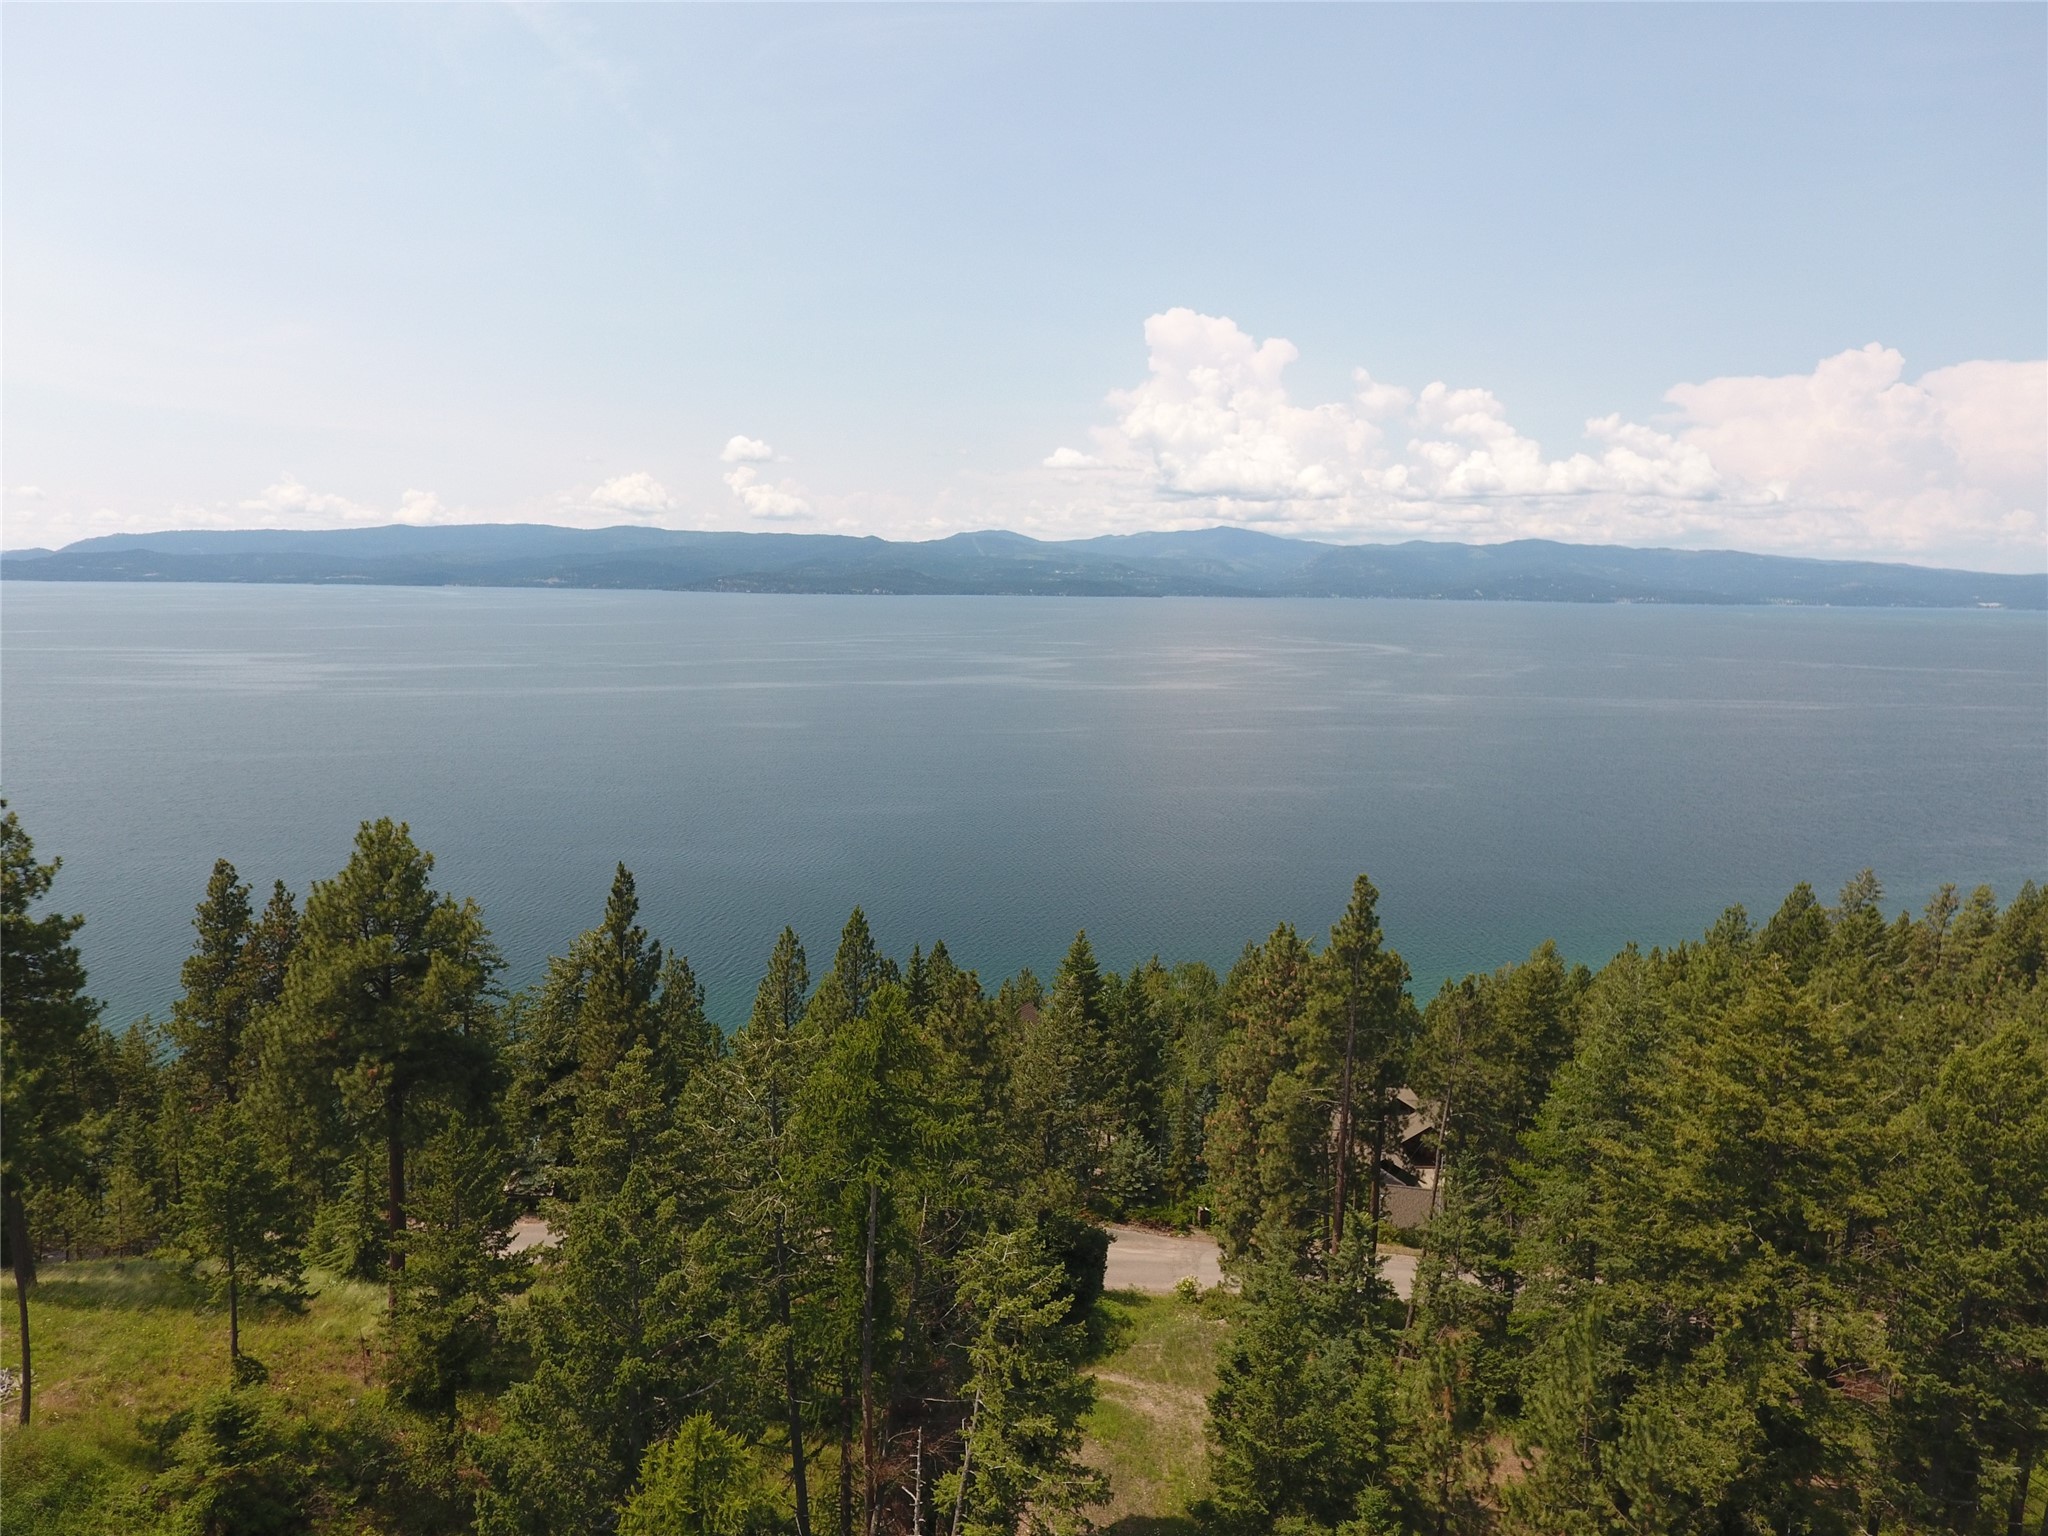 Amazing 0.9 +/- acre lot just south of Bigfork, MT.  Watch the sunset from your Montana dream home!  This parcel overlooks Flathead Lake and not only boasts extraordinary westerly views of Blacktail Mountain and the Salish Range, but also an excellent building site.  Power, cable, water, and gas are all available to the property.  Easy year-round access off Sylvan Drive with less than five minutes to services, amenities, schools, etc.  in the charming village of Bigfork.  Call Seth Price at (406) 459-4294 or your real estate professional today!